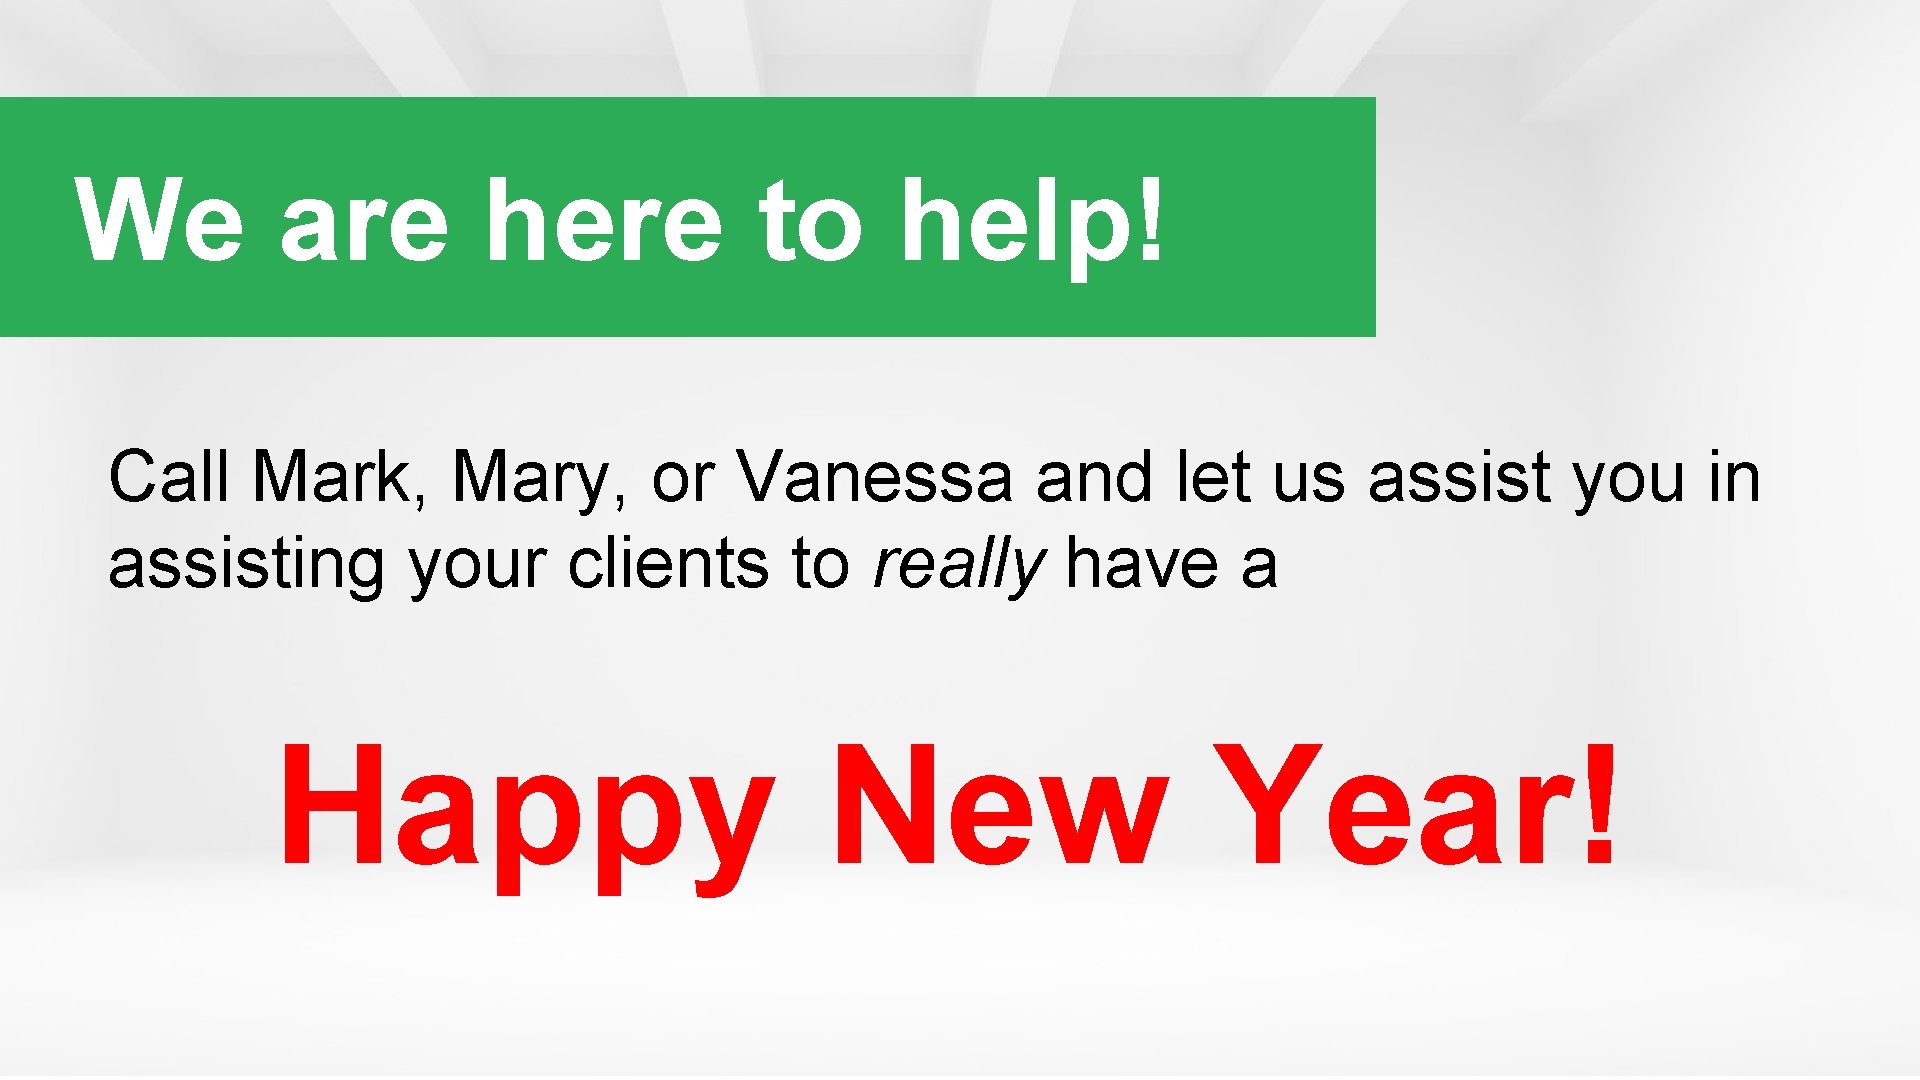 We are here to help! Call Mark, Mary, or Vanessa and let us assist